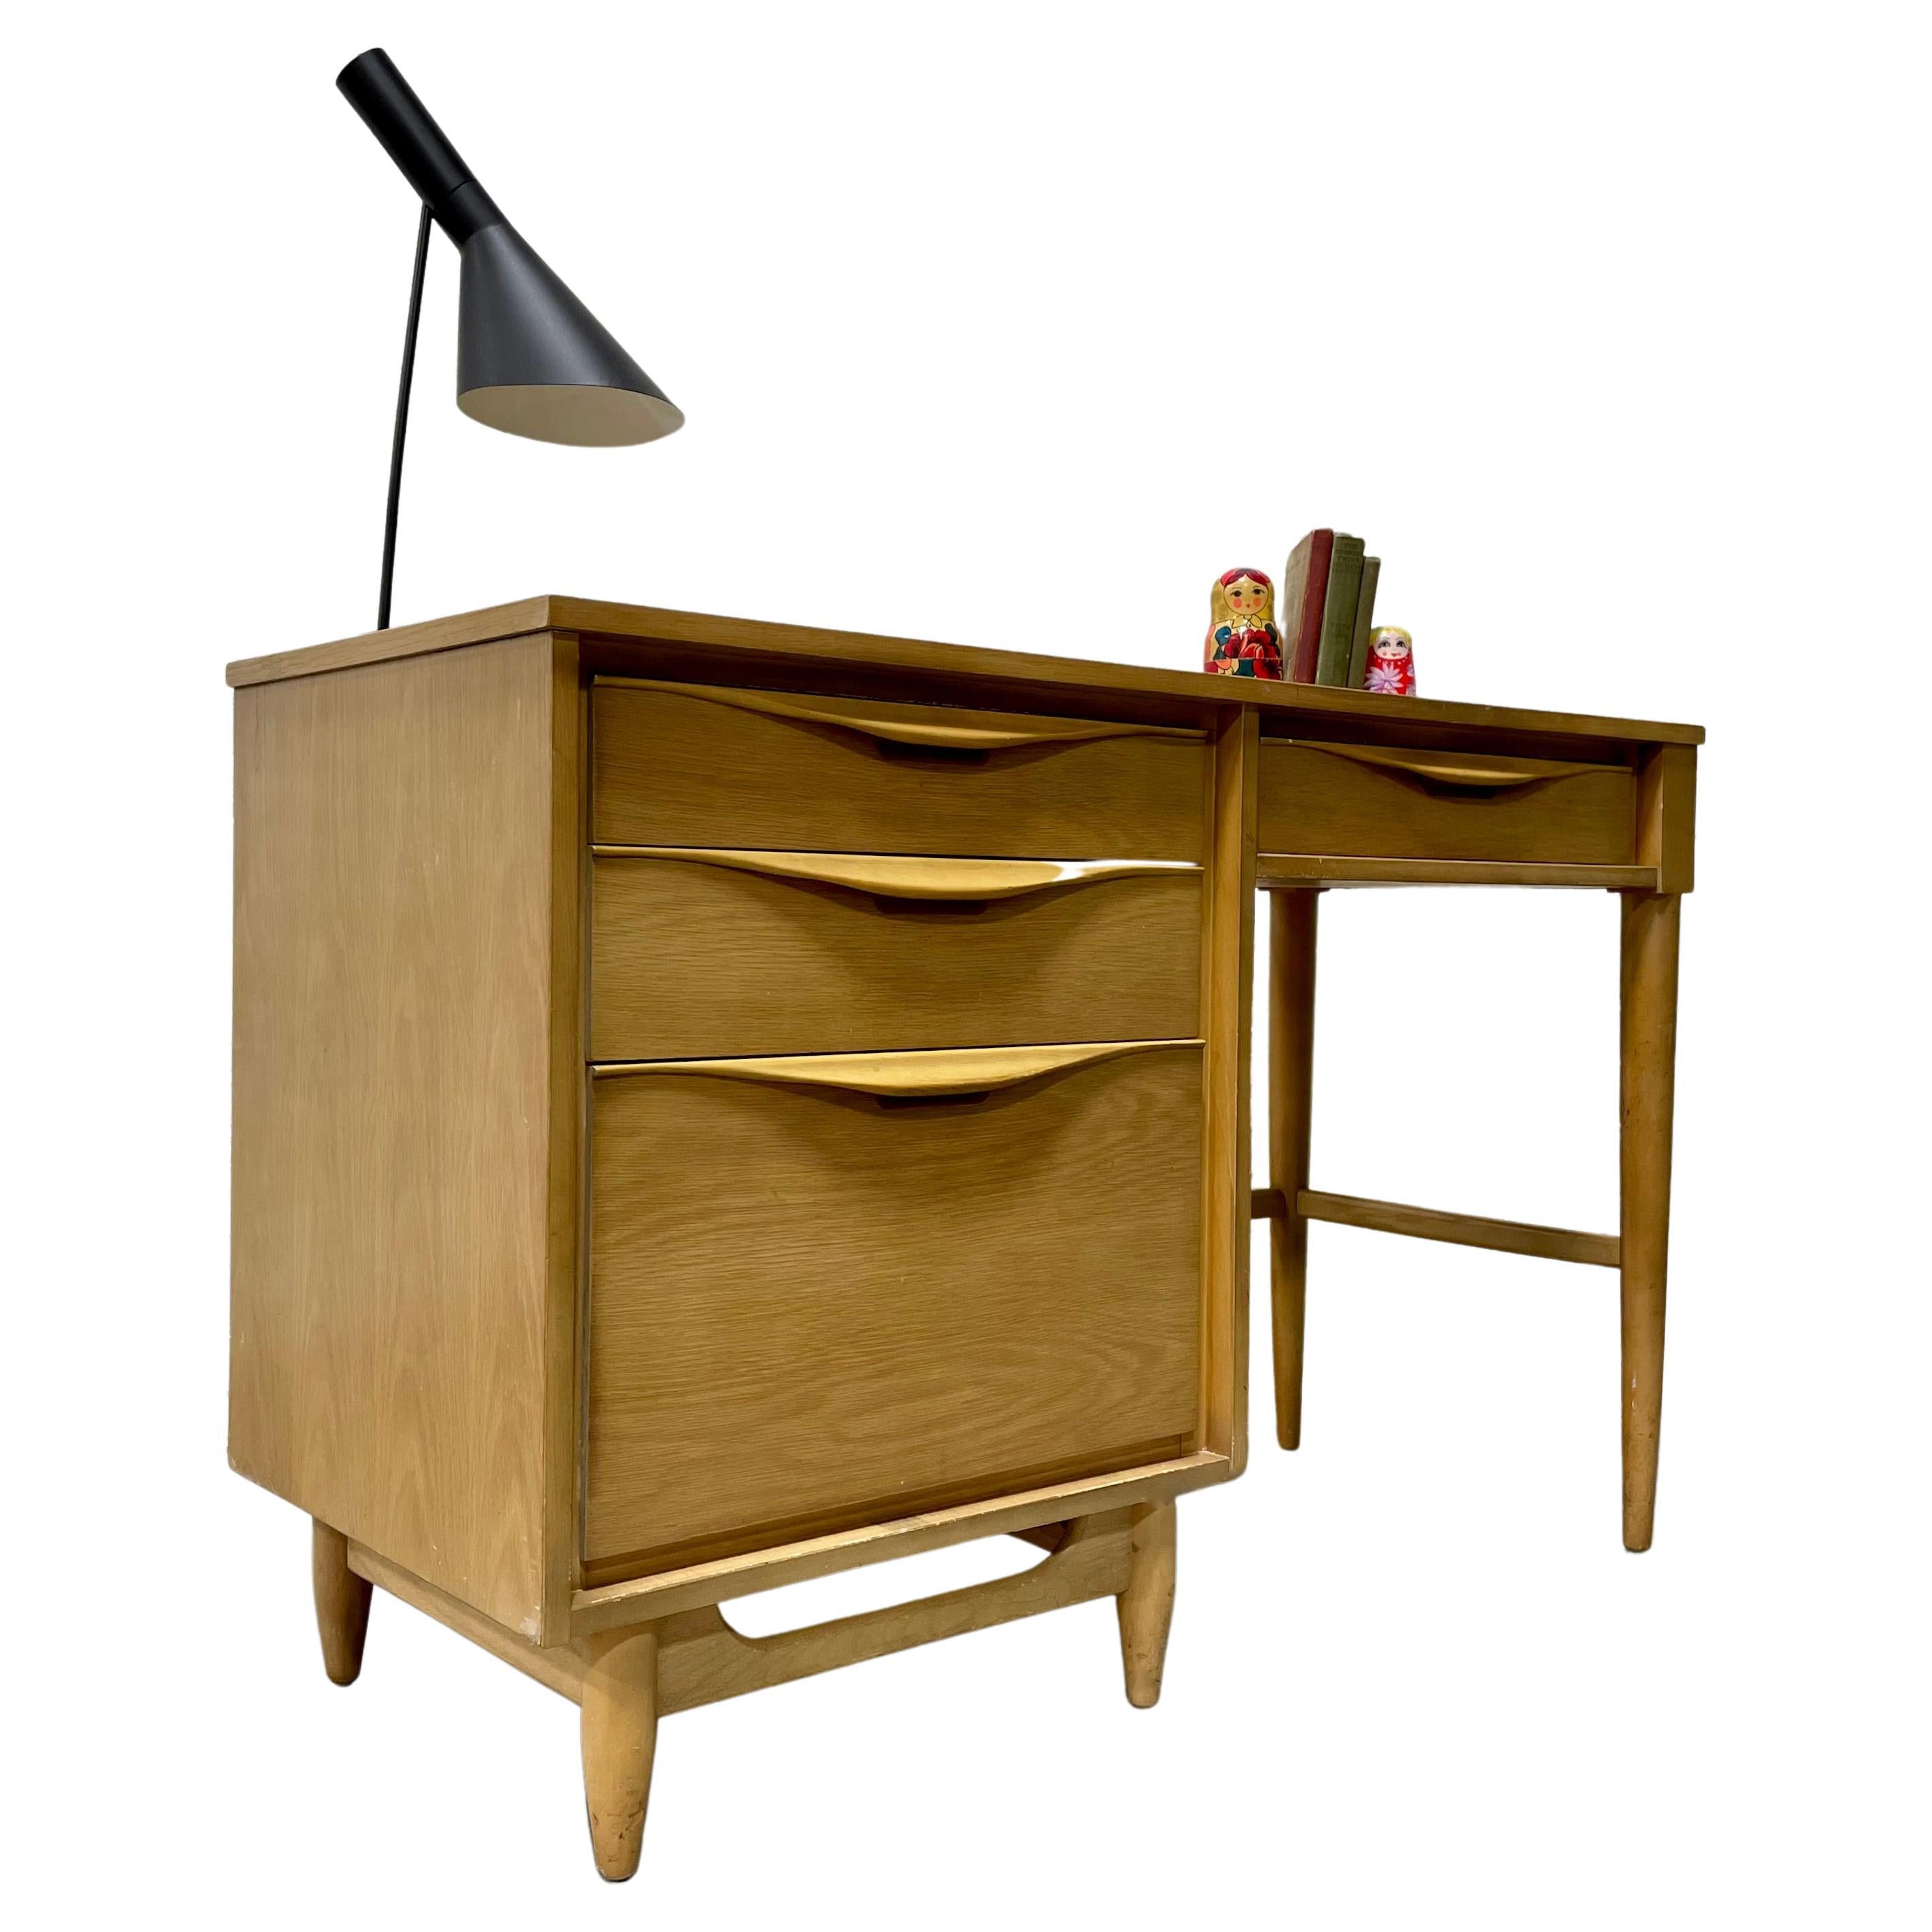 Apartment sized Mid-Century Modern Sculpted Oak Desk, circa 1960s - perfectly sized for an apartment or smaller office space yet offers a generous workspace. This beauty offers four drawers with sculpted hand pulls, including an extra deep drawer.